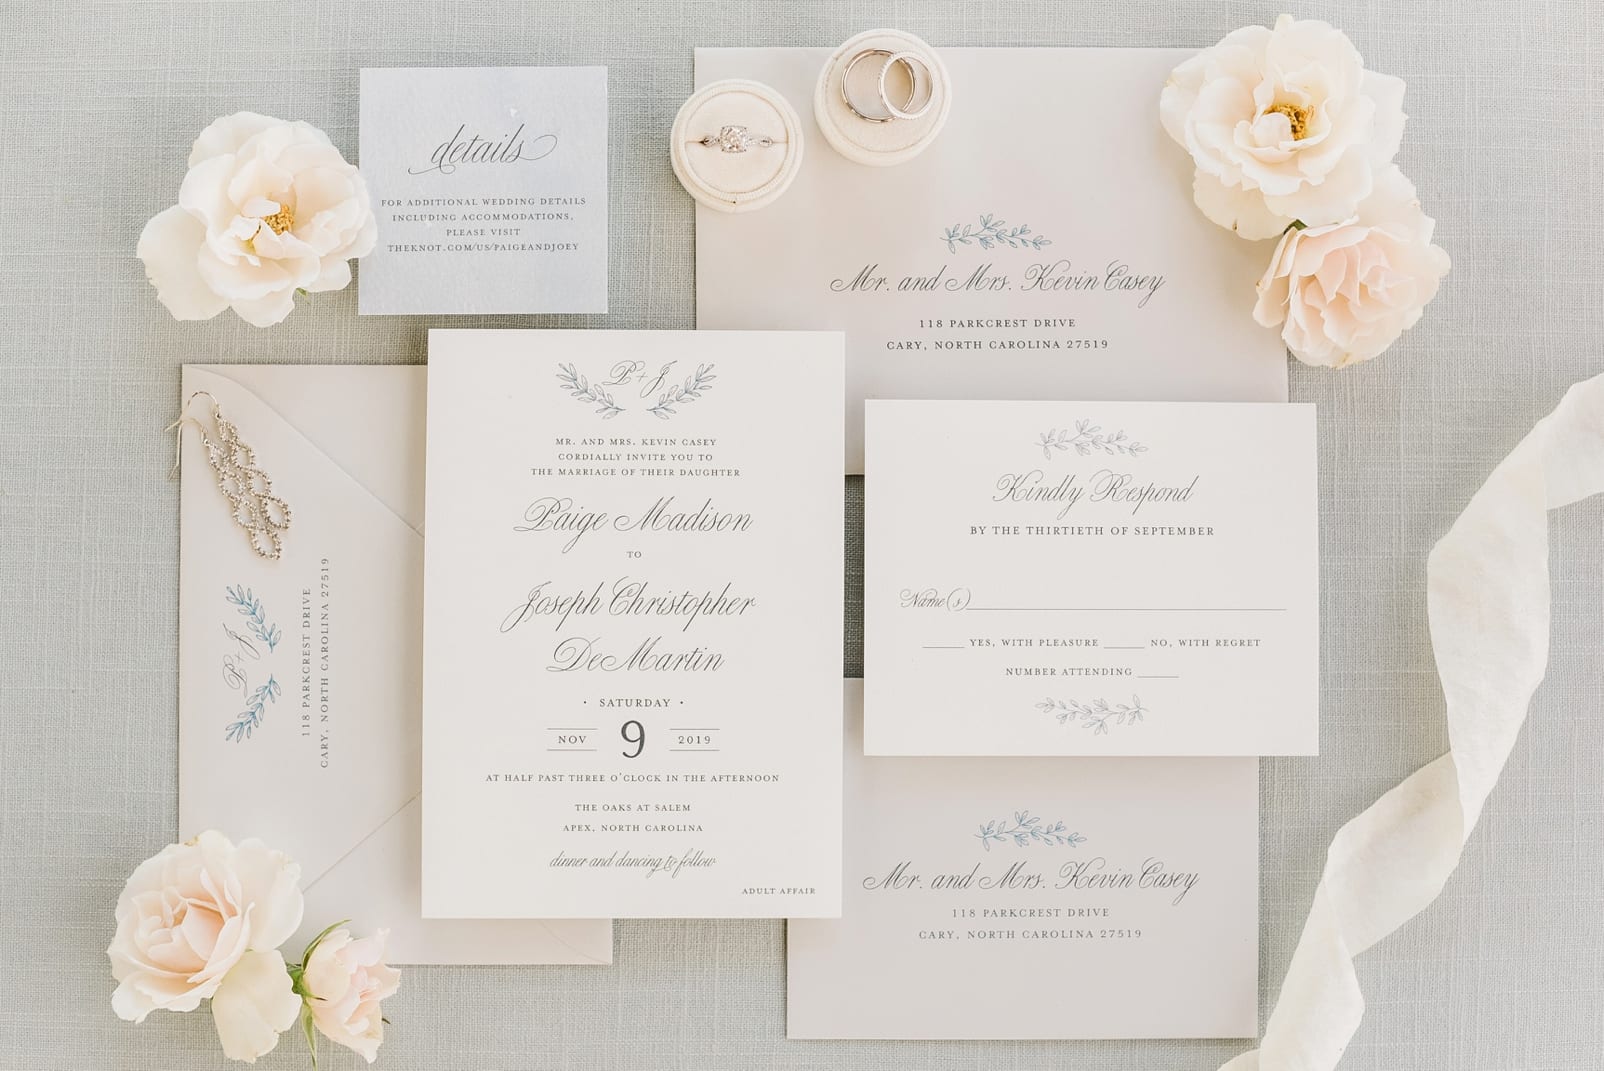 White wedding invitation suite styled with white flowers and blue script photo